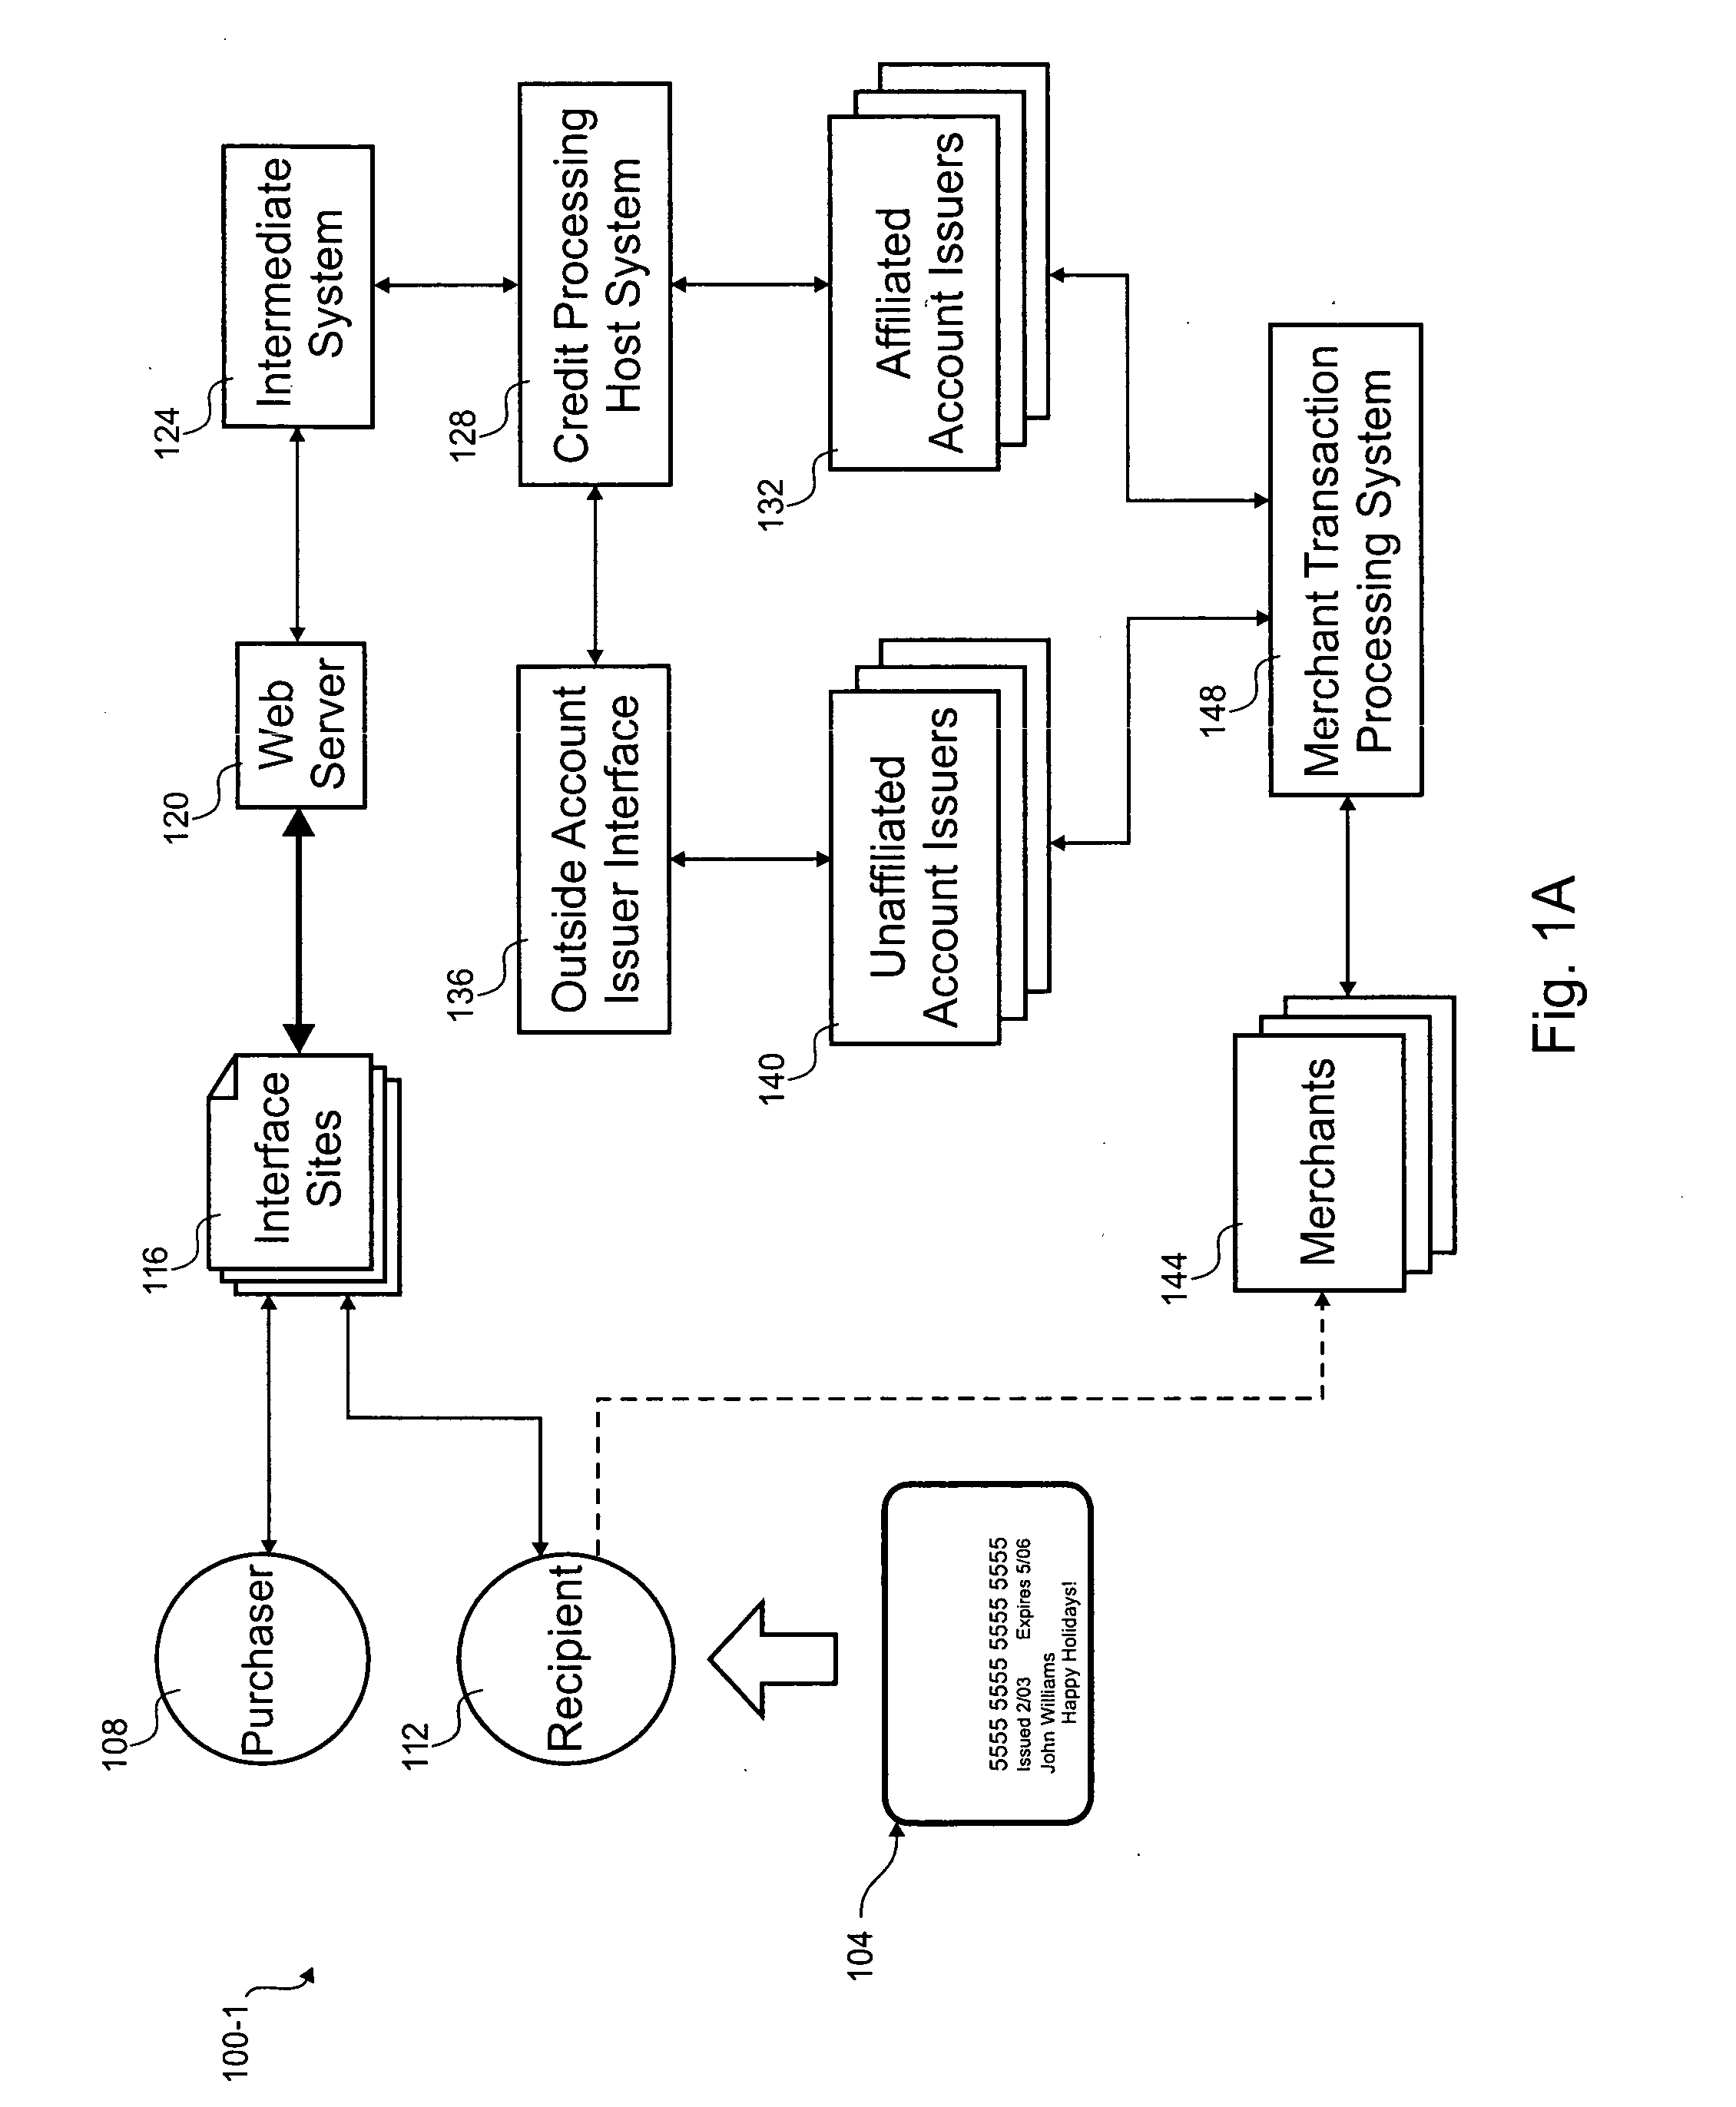 Open loop stored value system